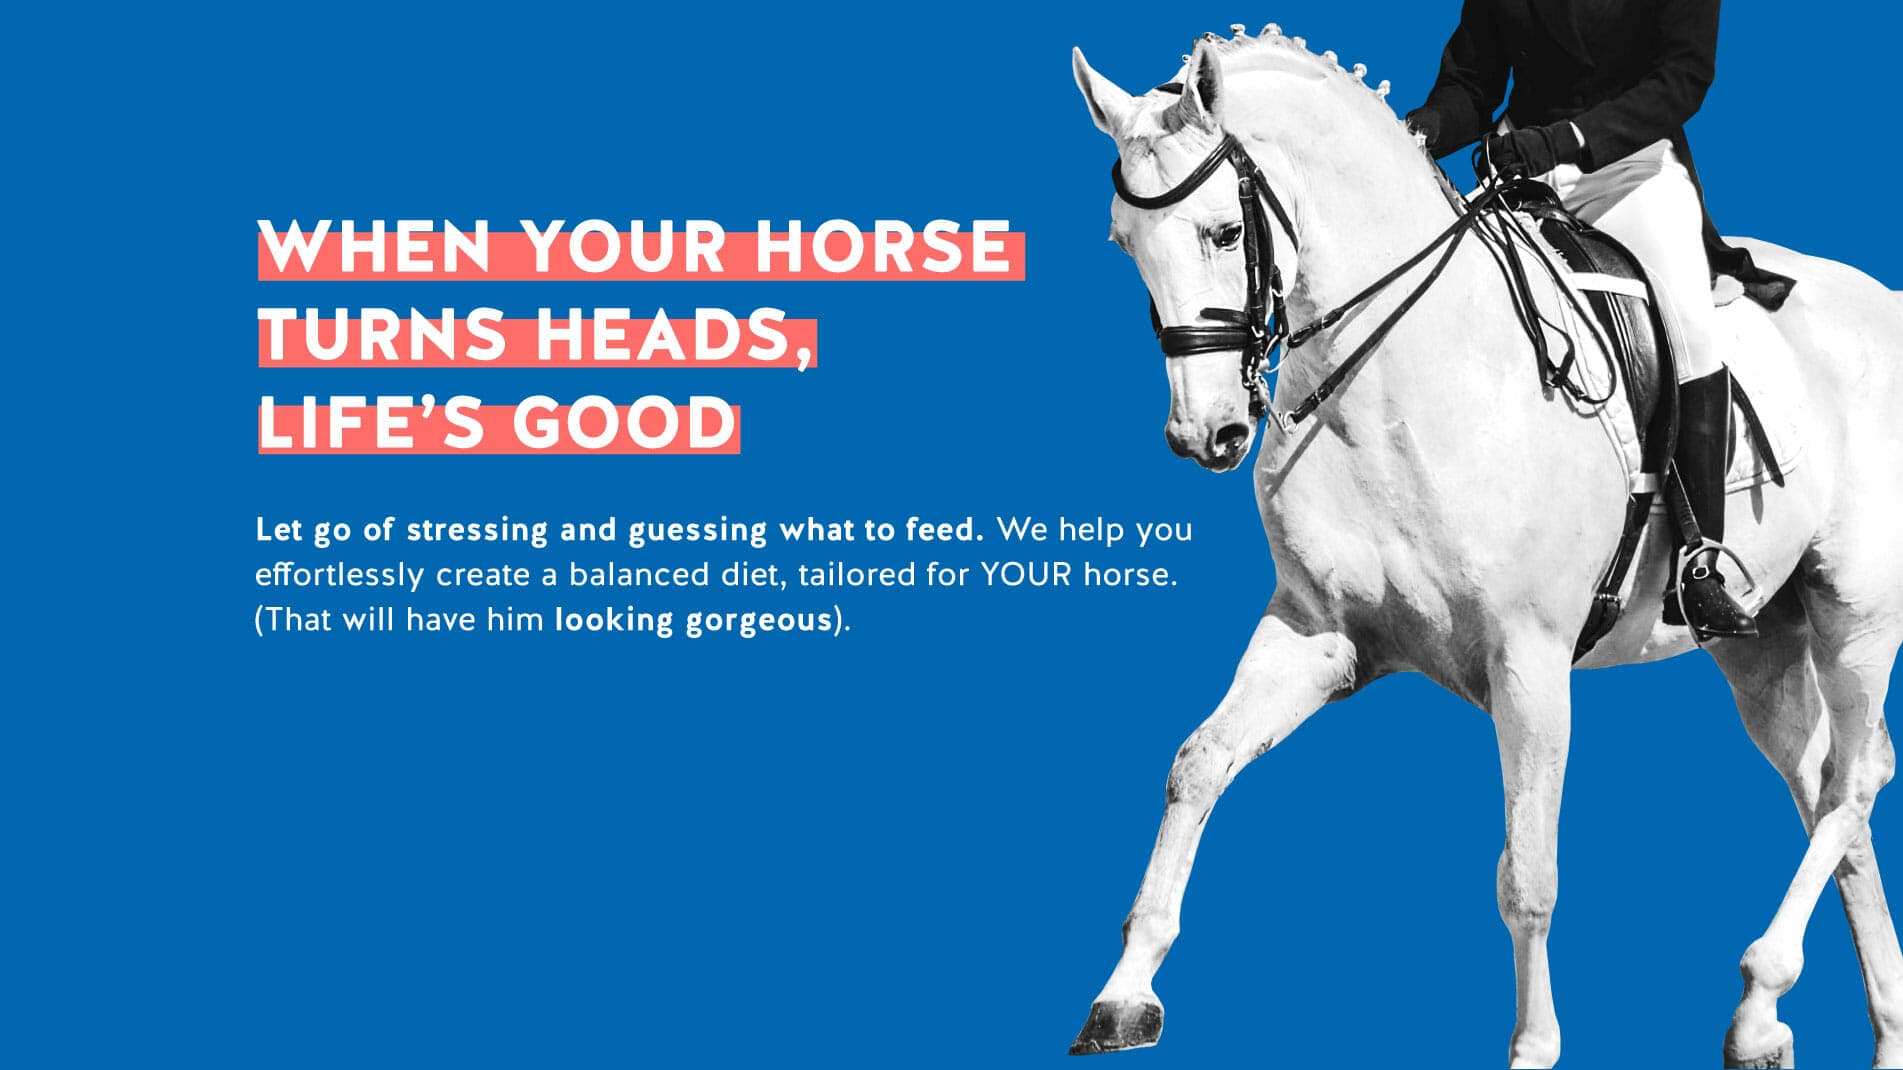 FeedXL promotion showing rider on a black horse.